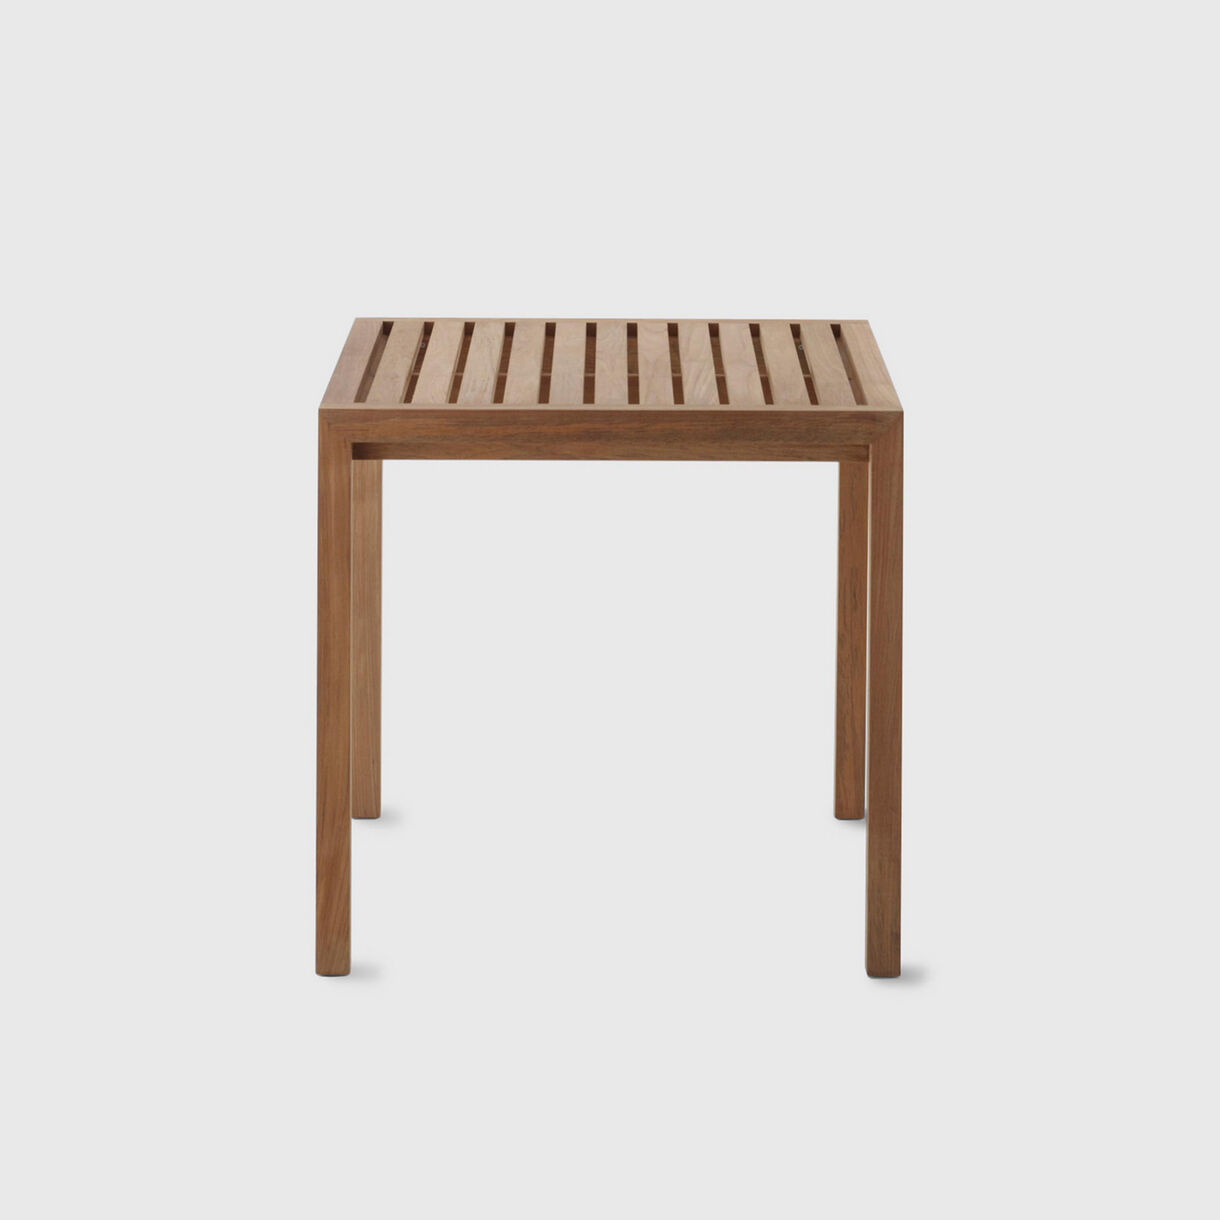 Plaza Small Table